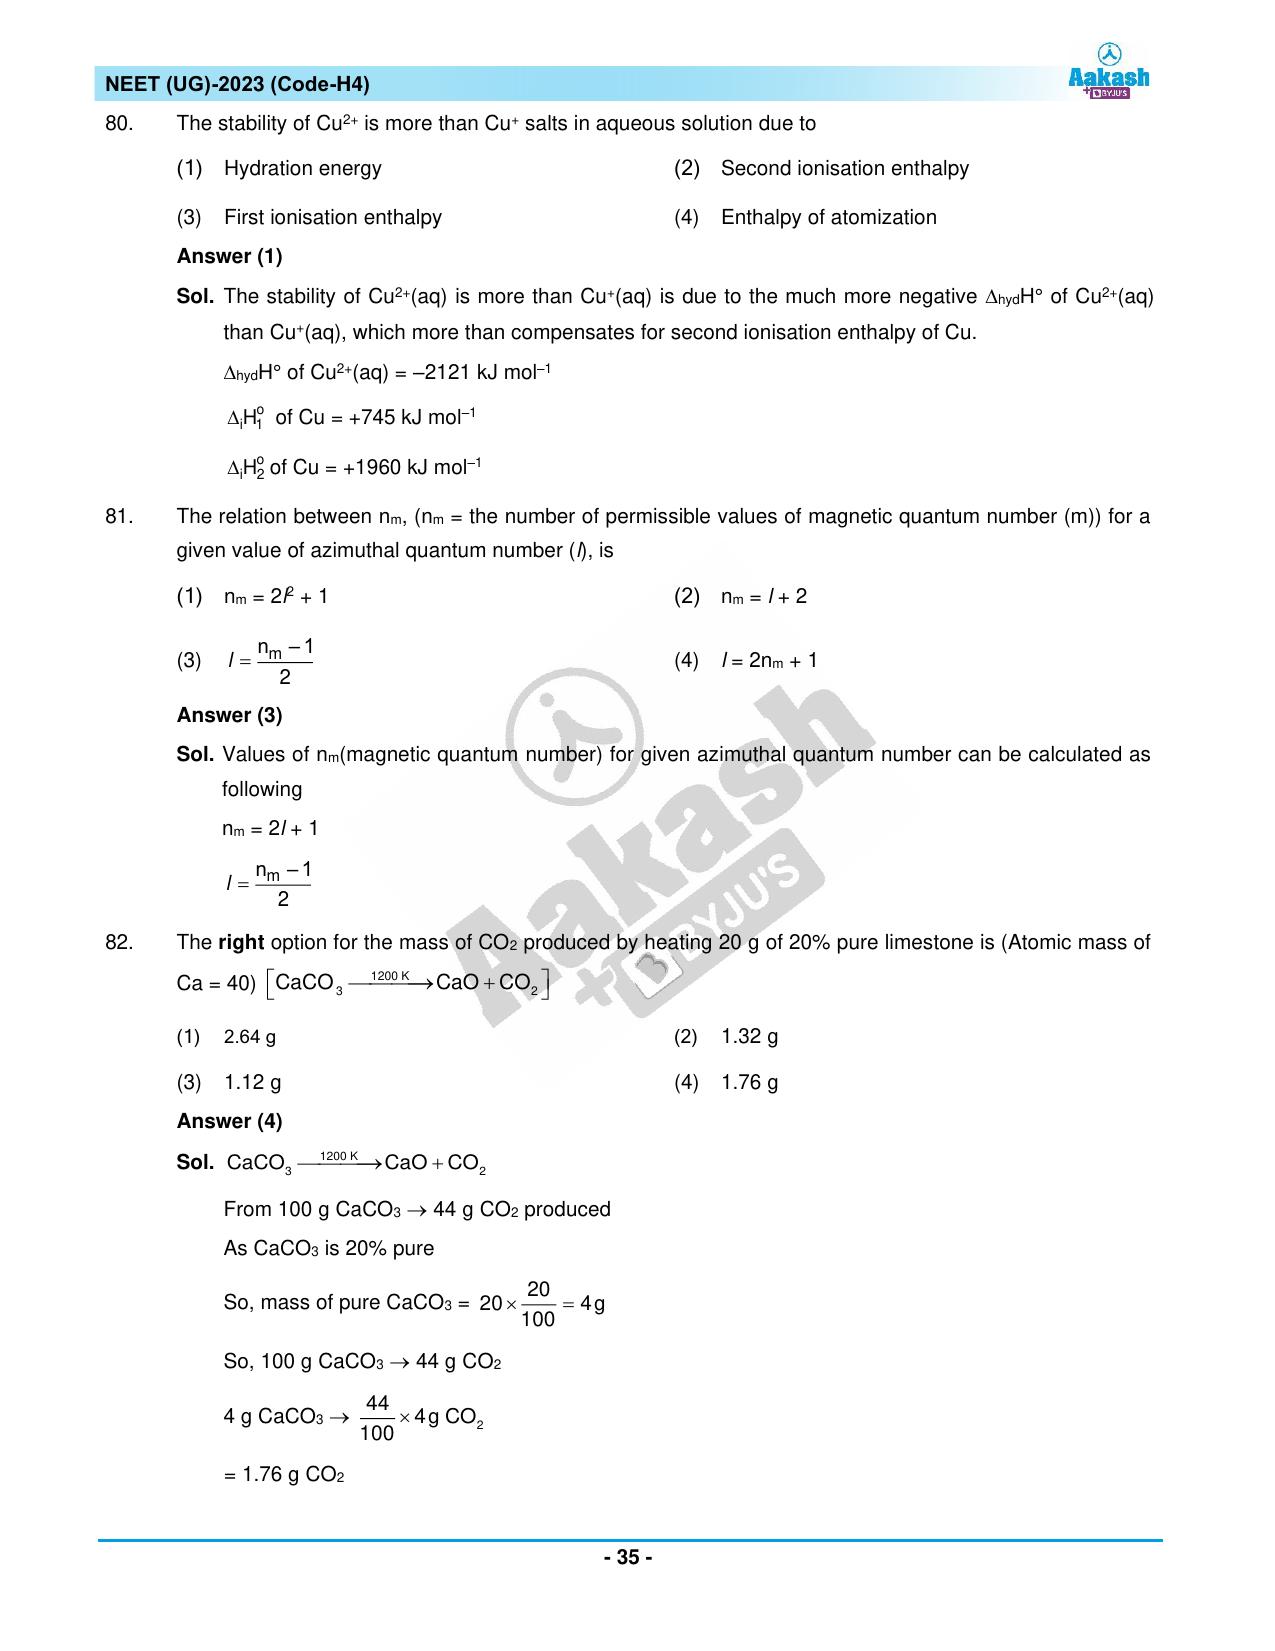 NEET 2023 Question Paper H4 - Page 35